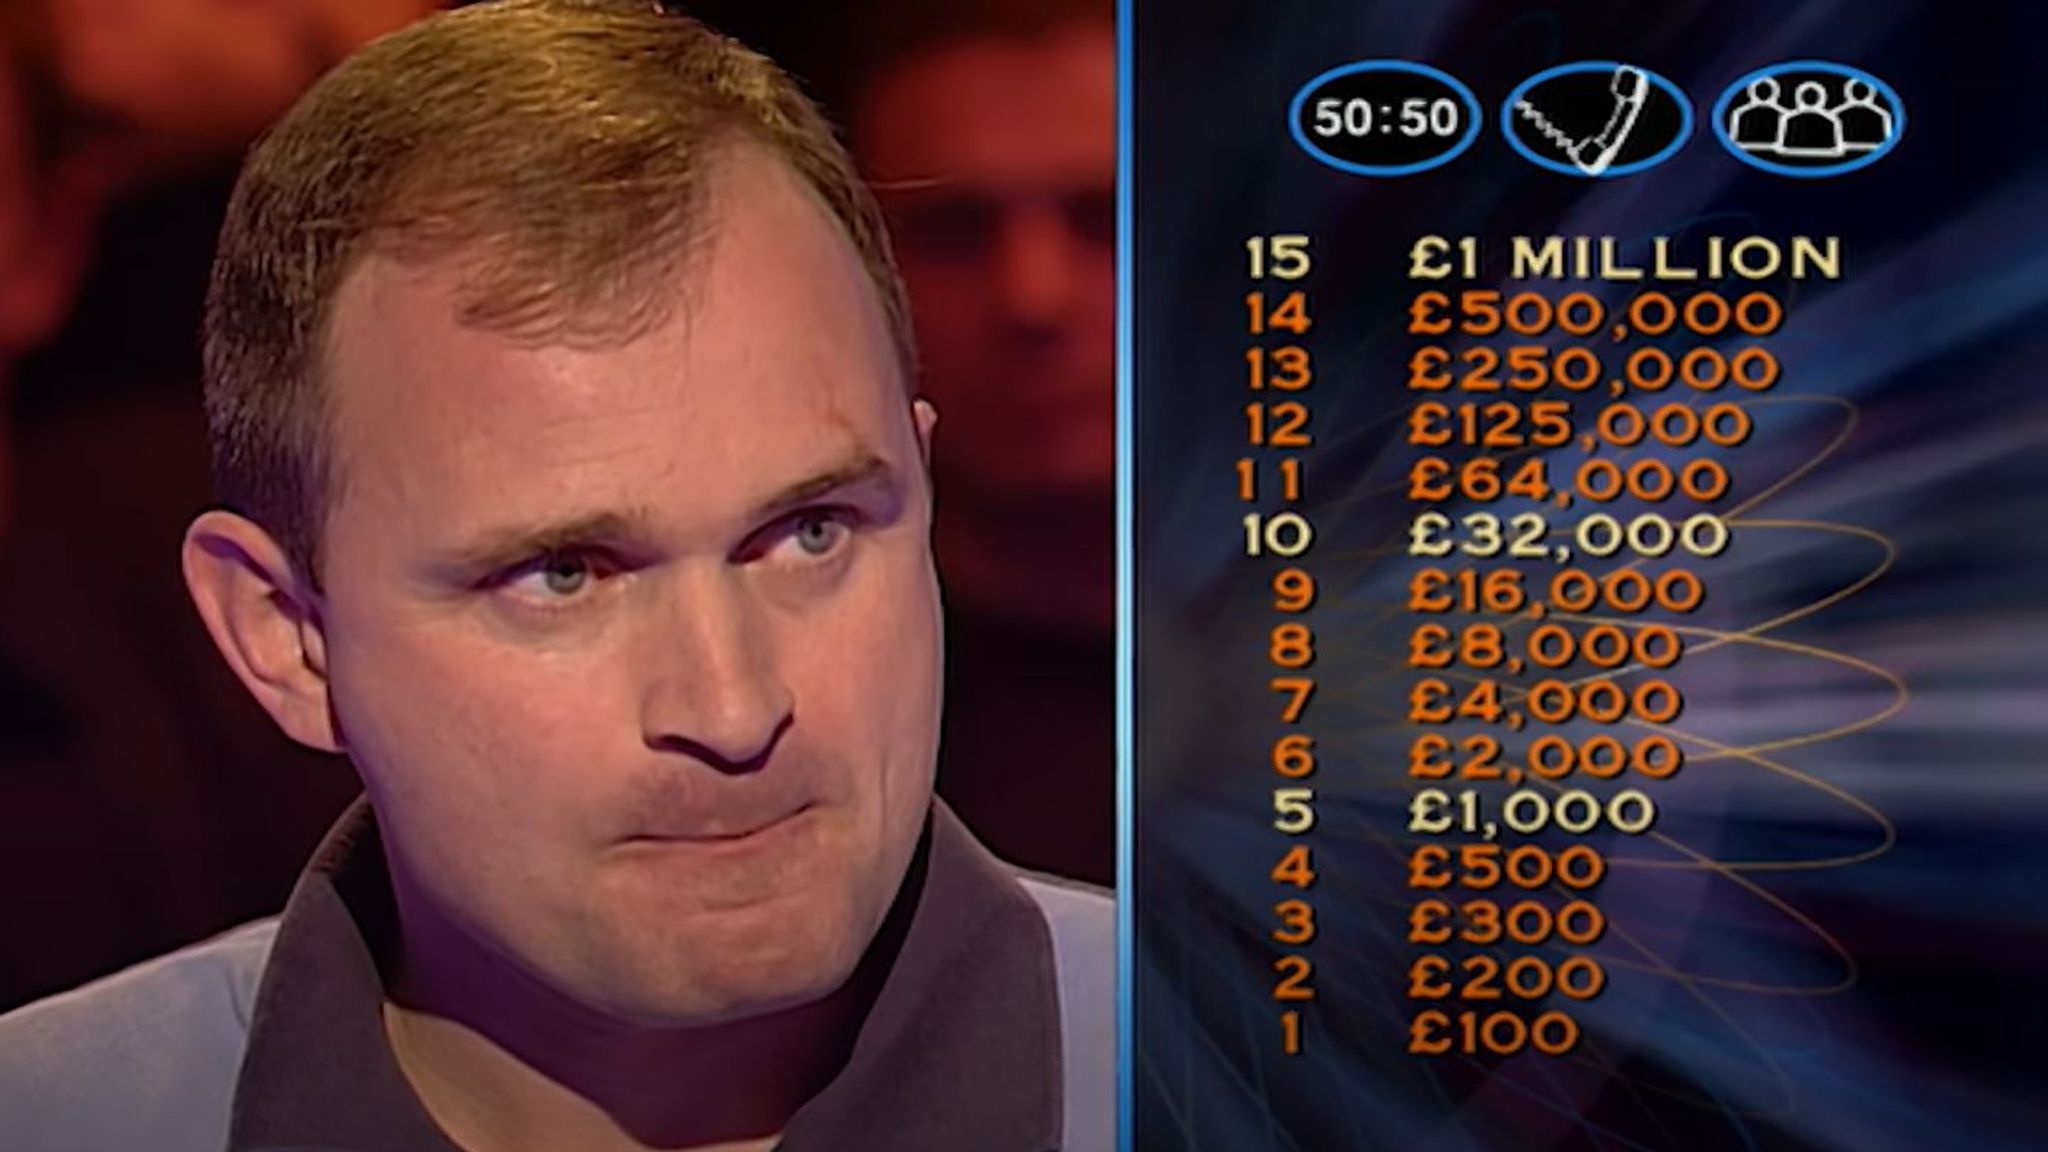 Who Wants To Be A Millionaire cheating scandal I was there